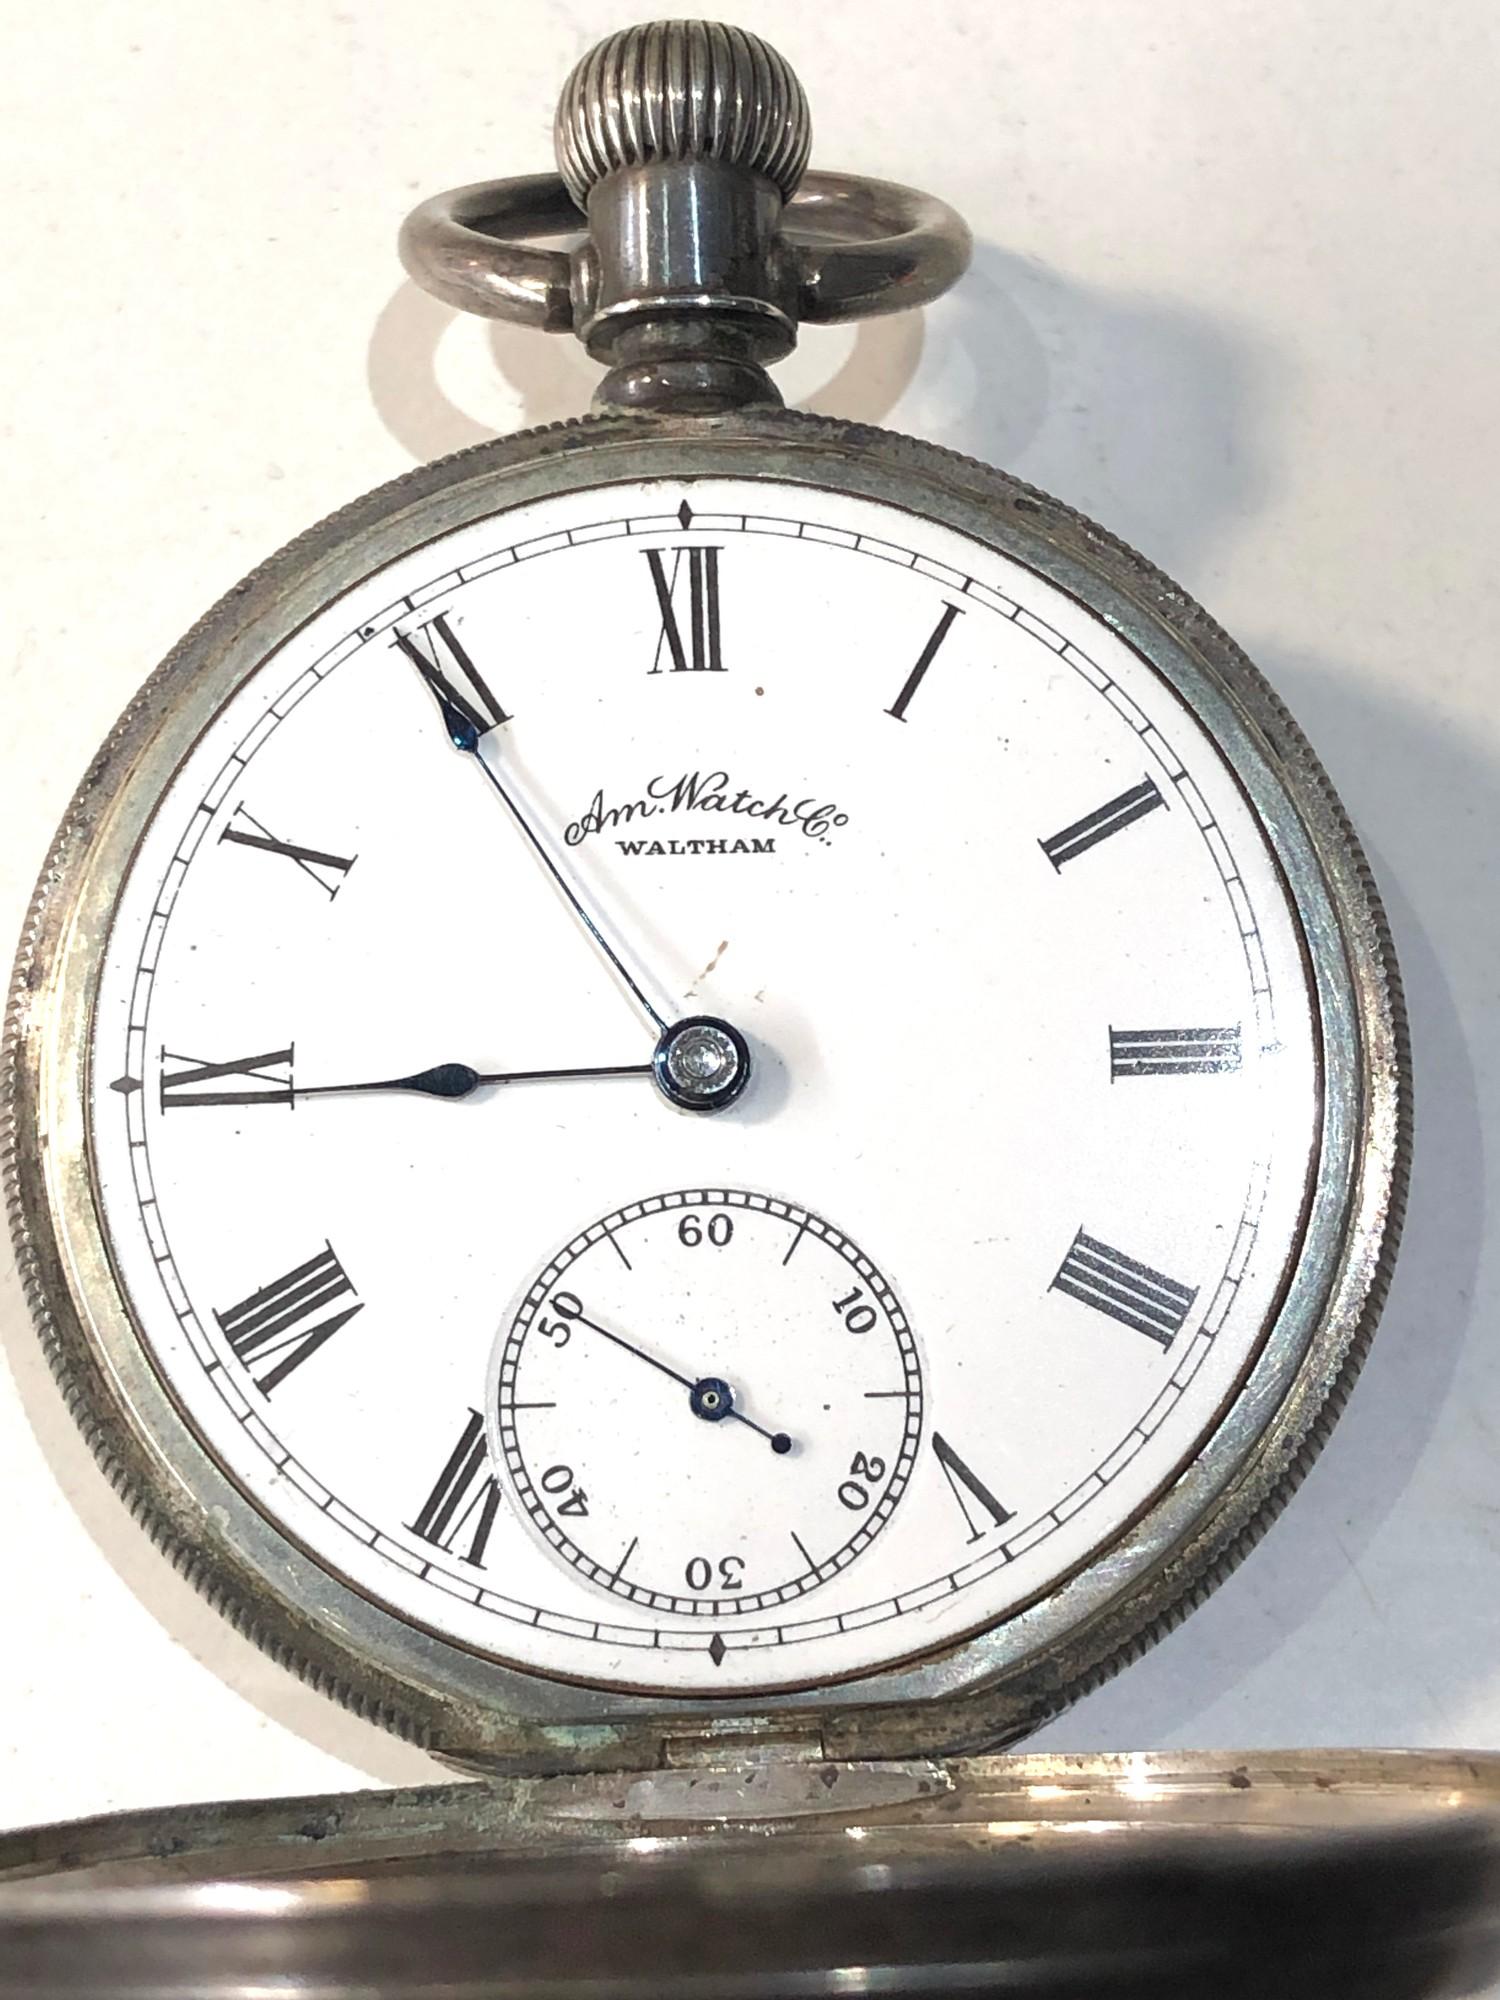 Antique silver cased Am watch Co waltham pocket watch balance will spin does not tick keeps - Image 3 of 5